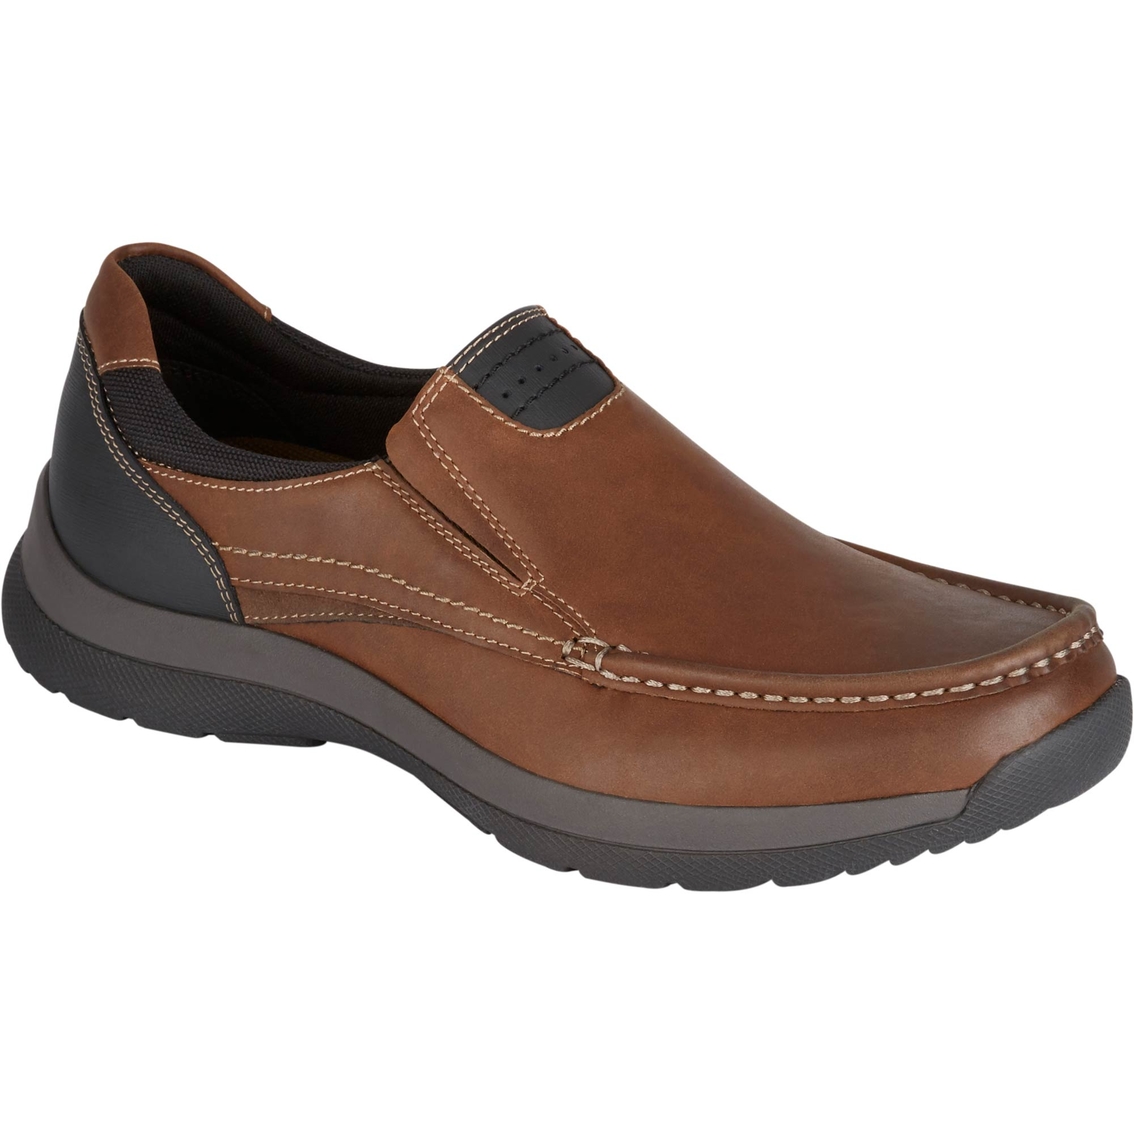 Dockers Tan Ramsey Casual Slip On Shoes | Casual Shoes | Shoes | Shop ...